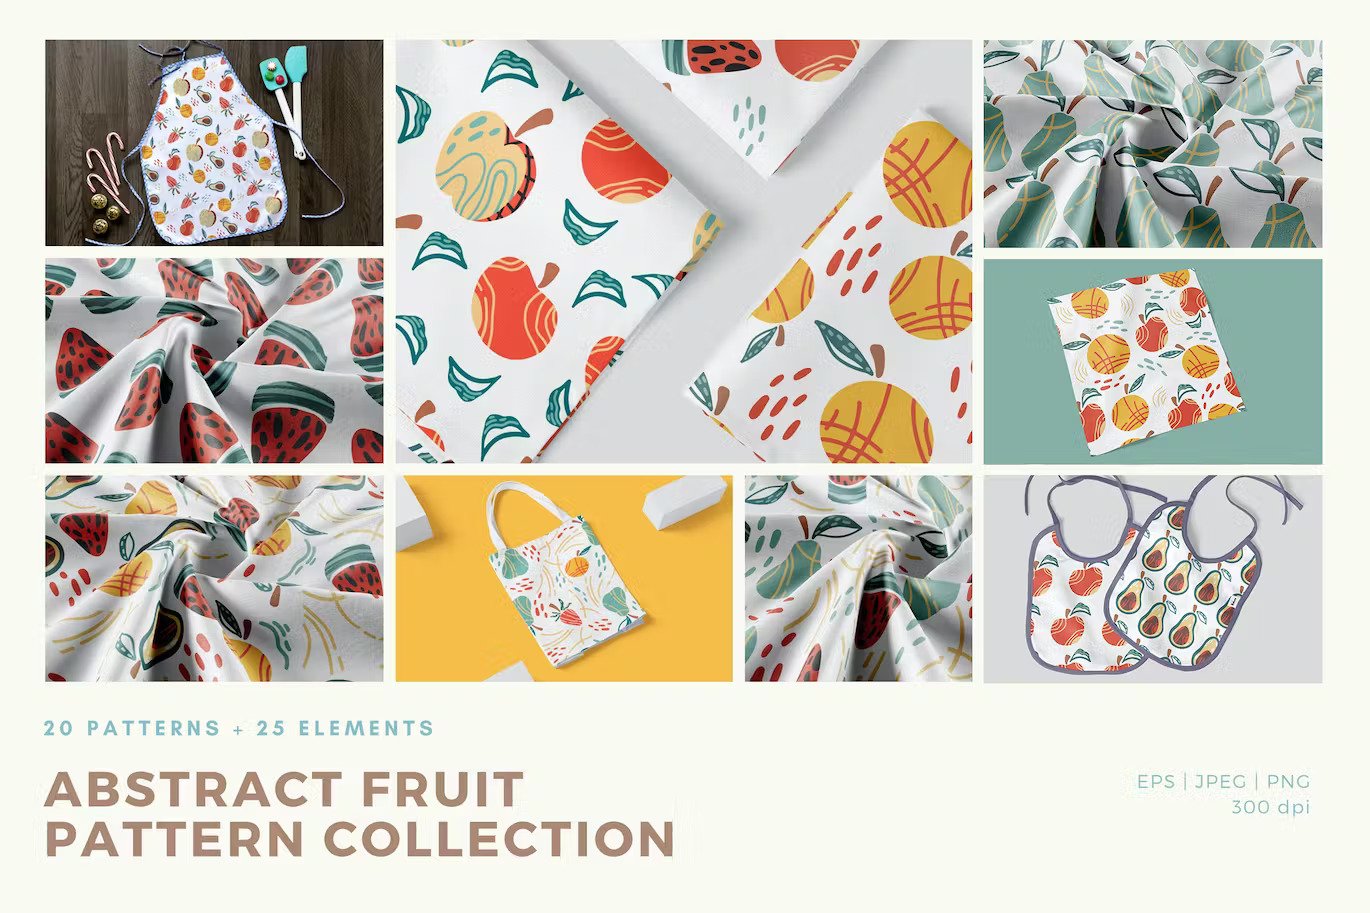 An abstract fruit pattern collection